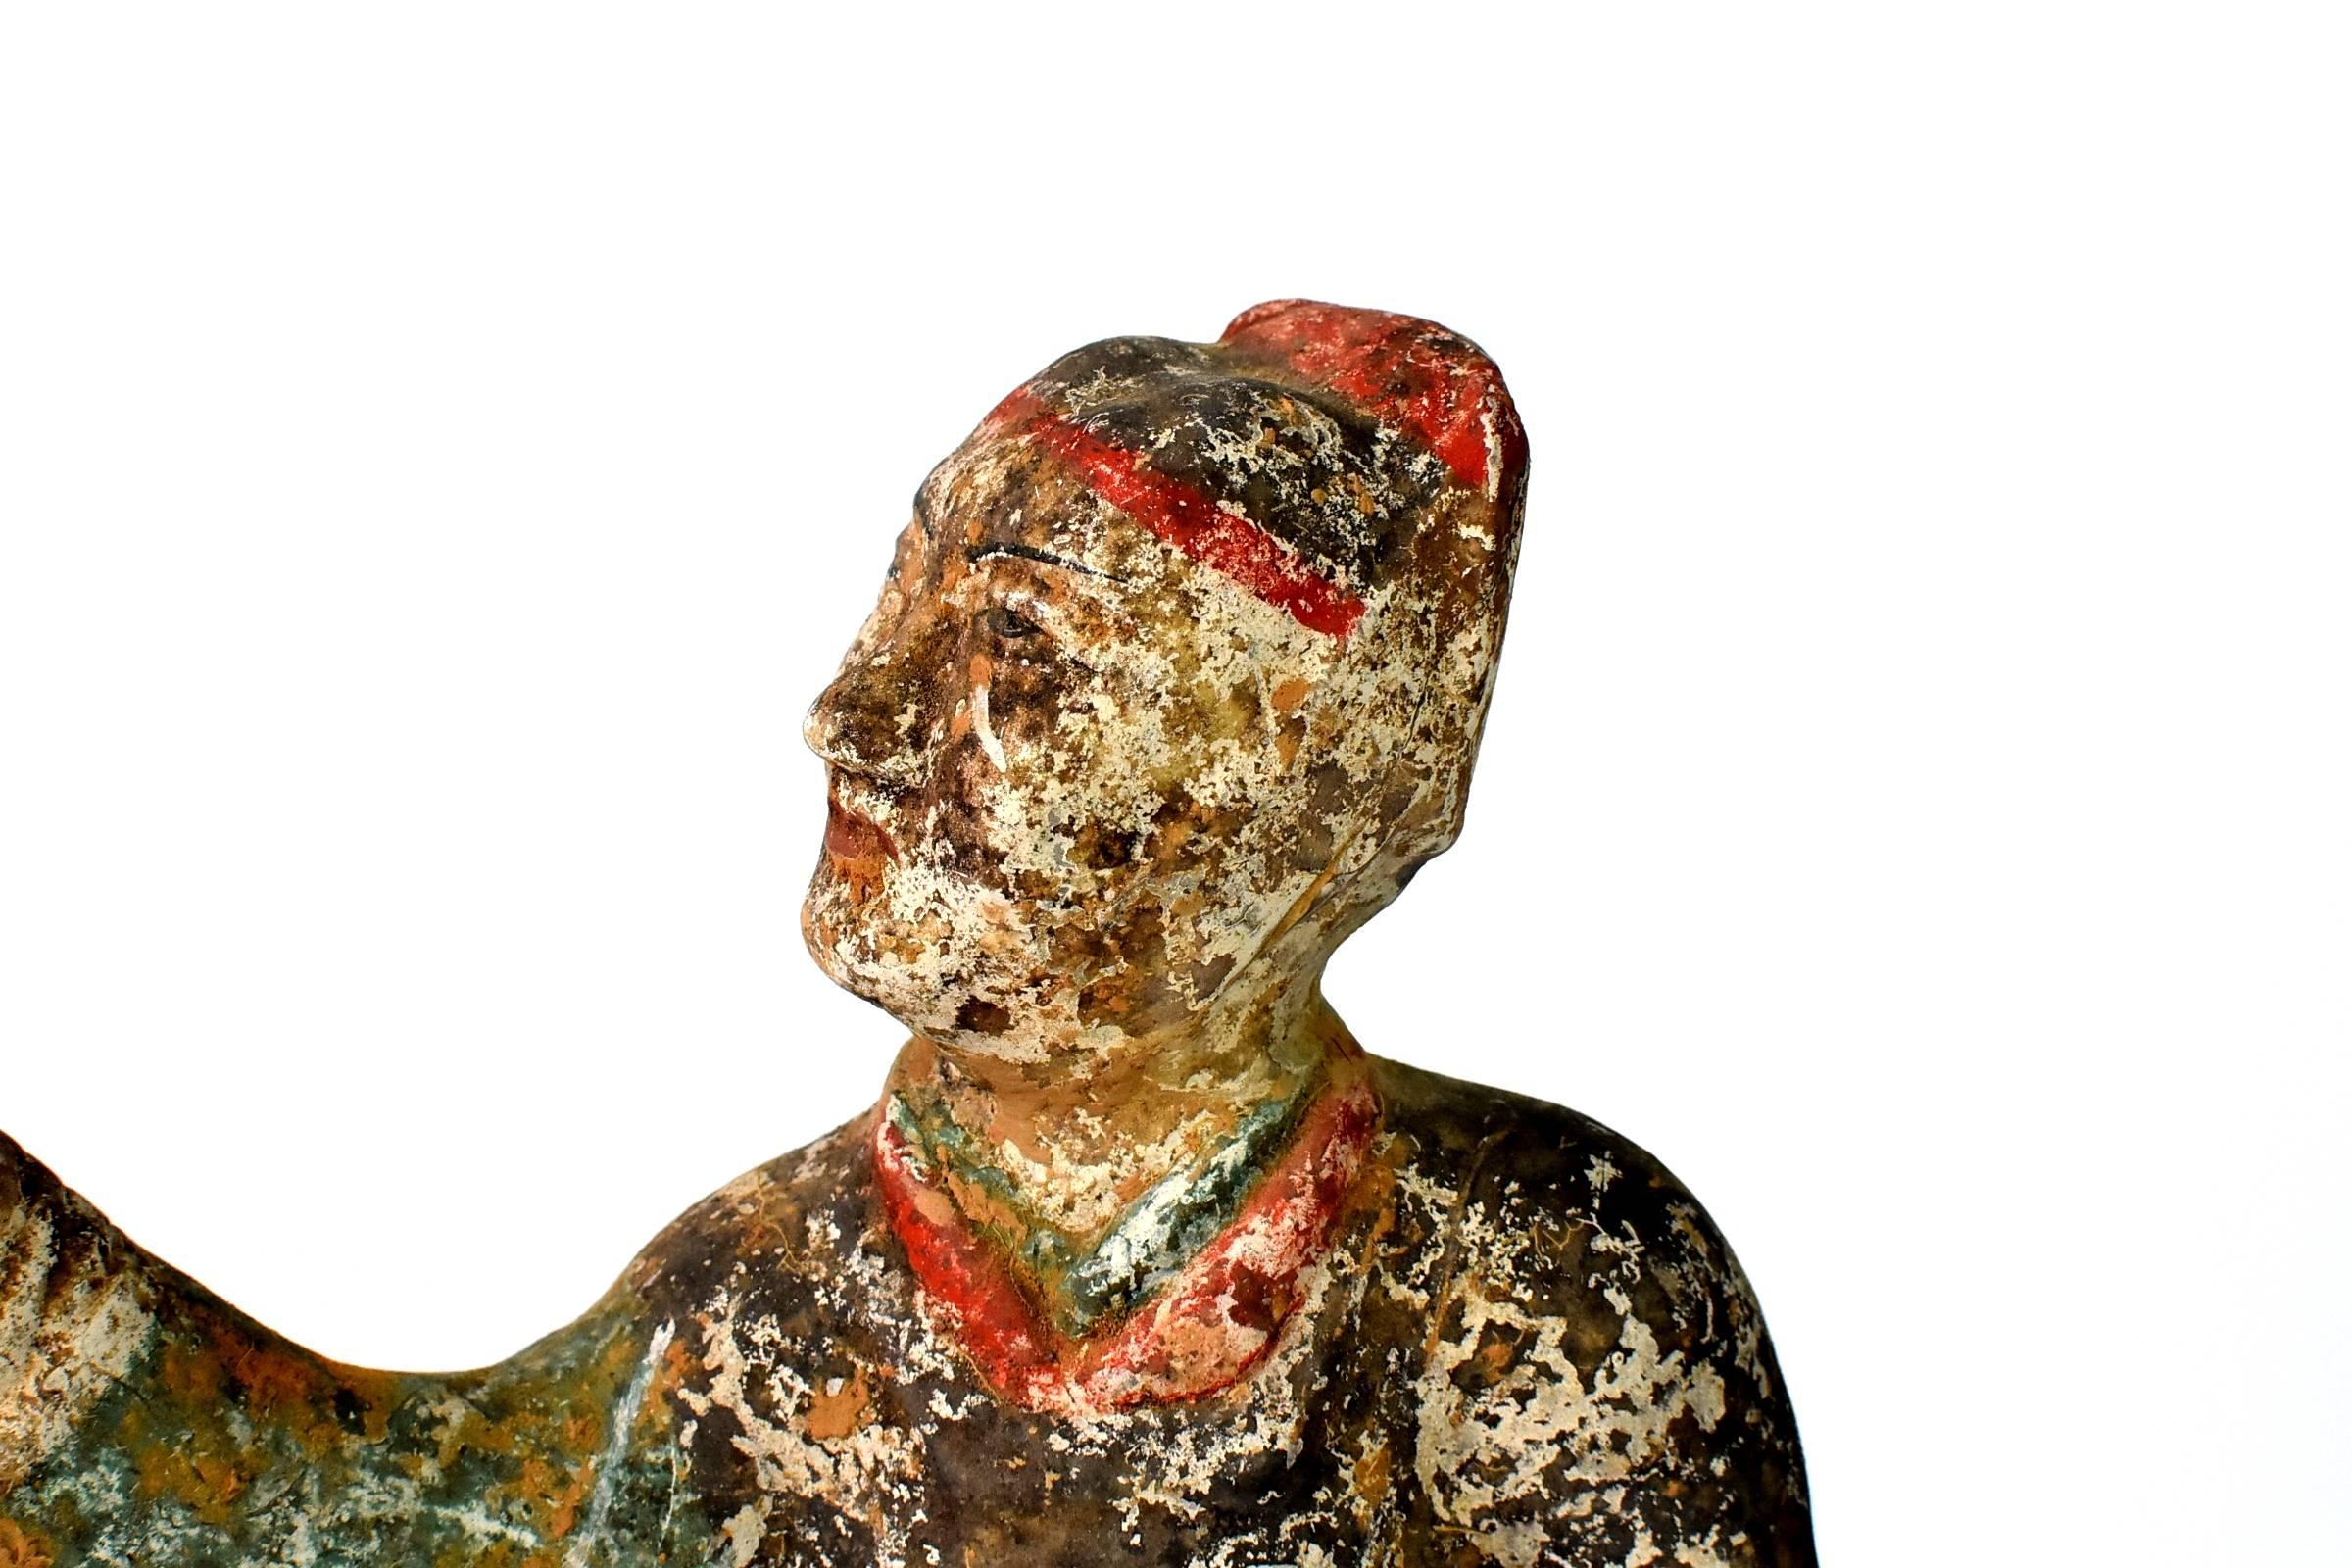 A fantastic Han style terracotta figure. Such a figure is seen in the Han dynasty dating 206 BC to 220 AD. The figure wears a hat and boots, his black robe has red and green stripes. Either a servant or a hostler, such a statue was regarded as a